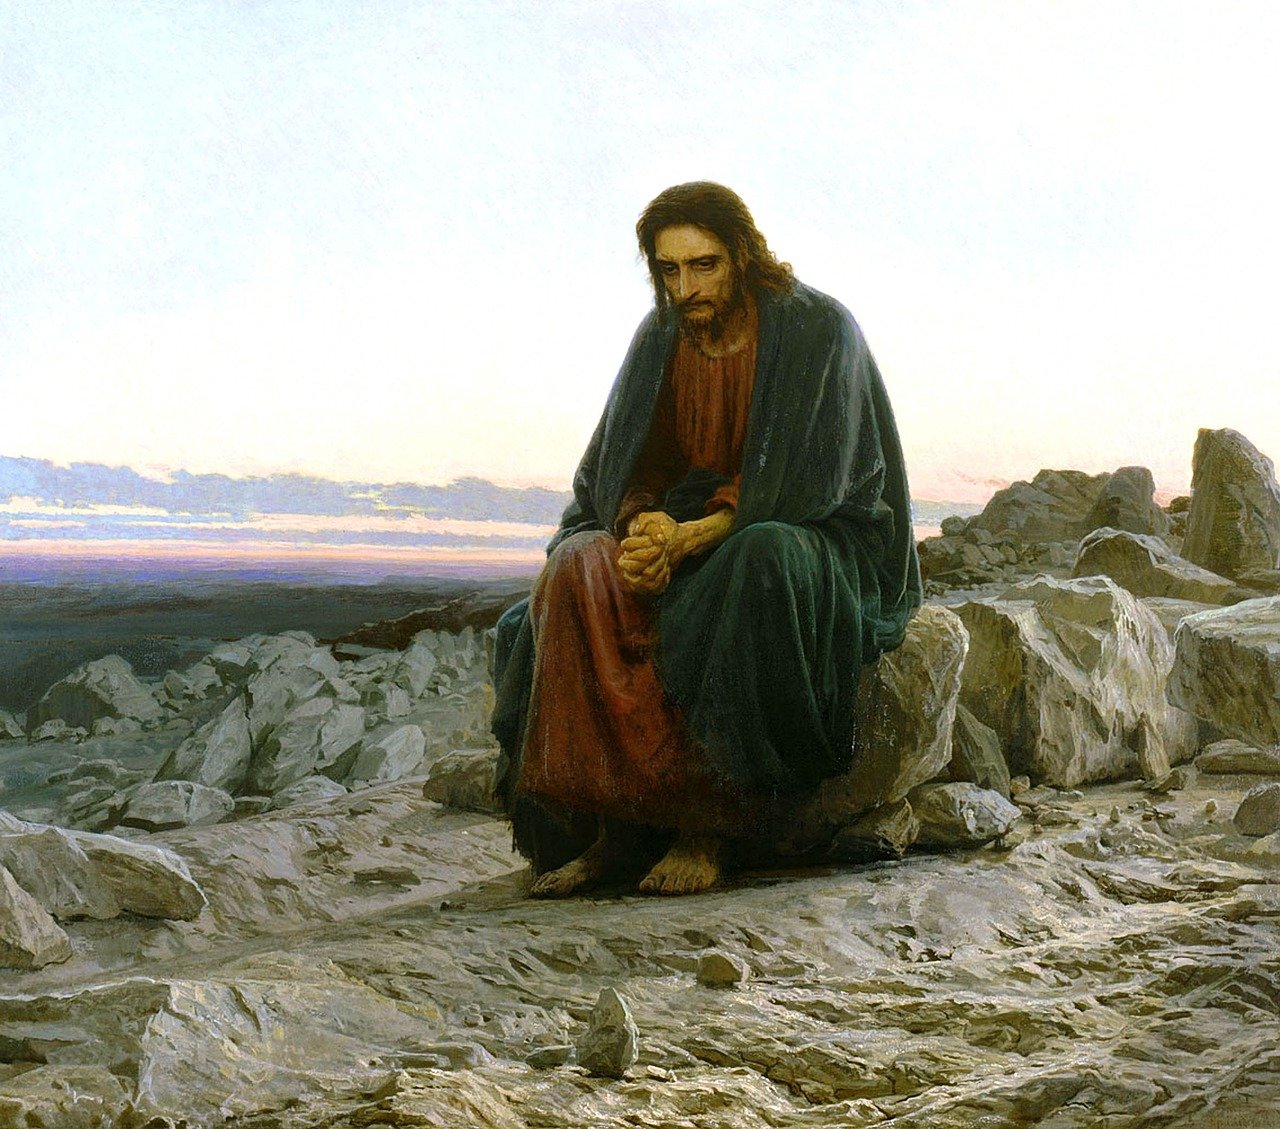 a painting of jesus sitting on a rock, a picture, by Carl Heinrich Bloch, shutterstock, with a sad expression, in the desert, tuomas korpi bouguereau, end of the day